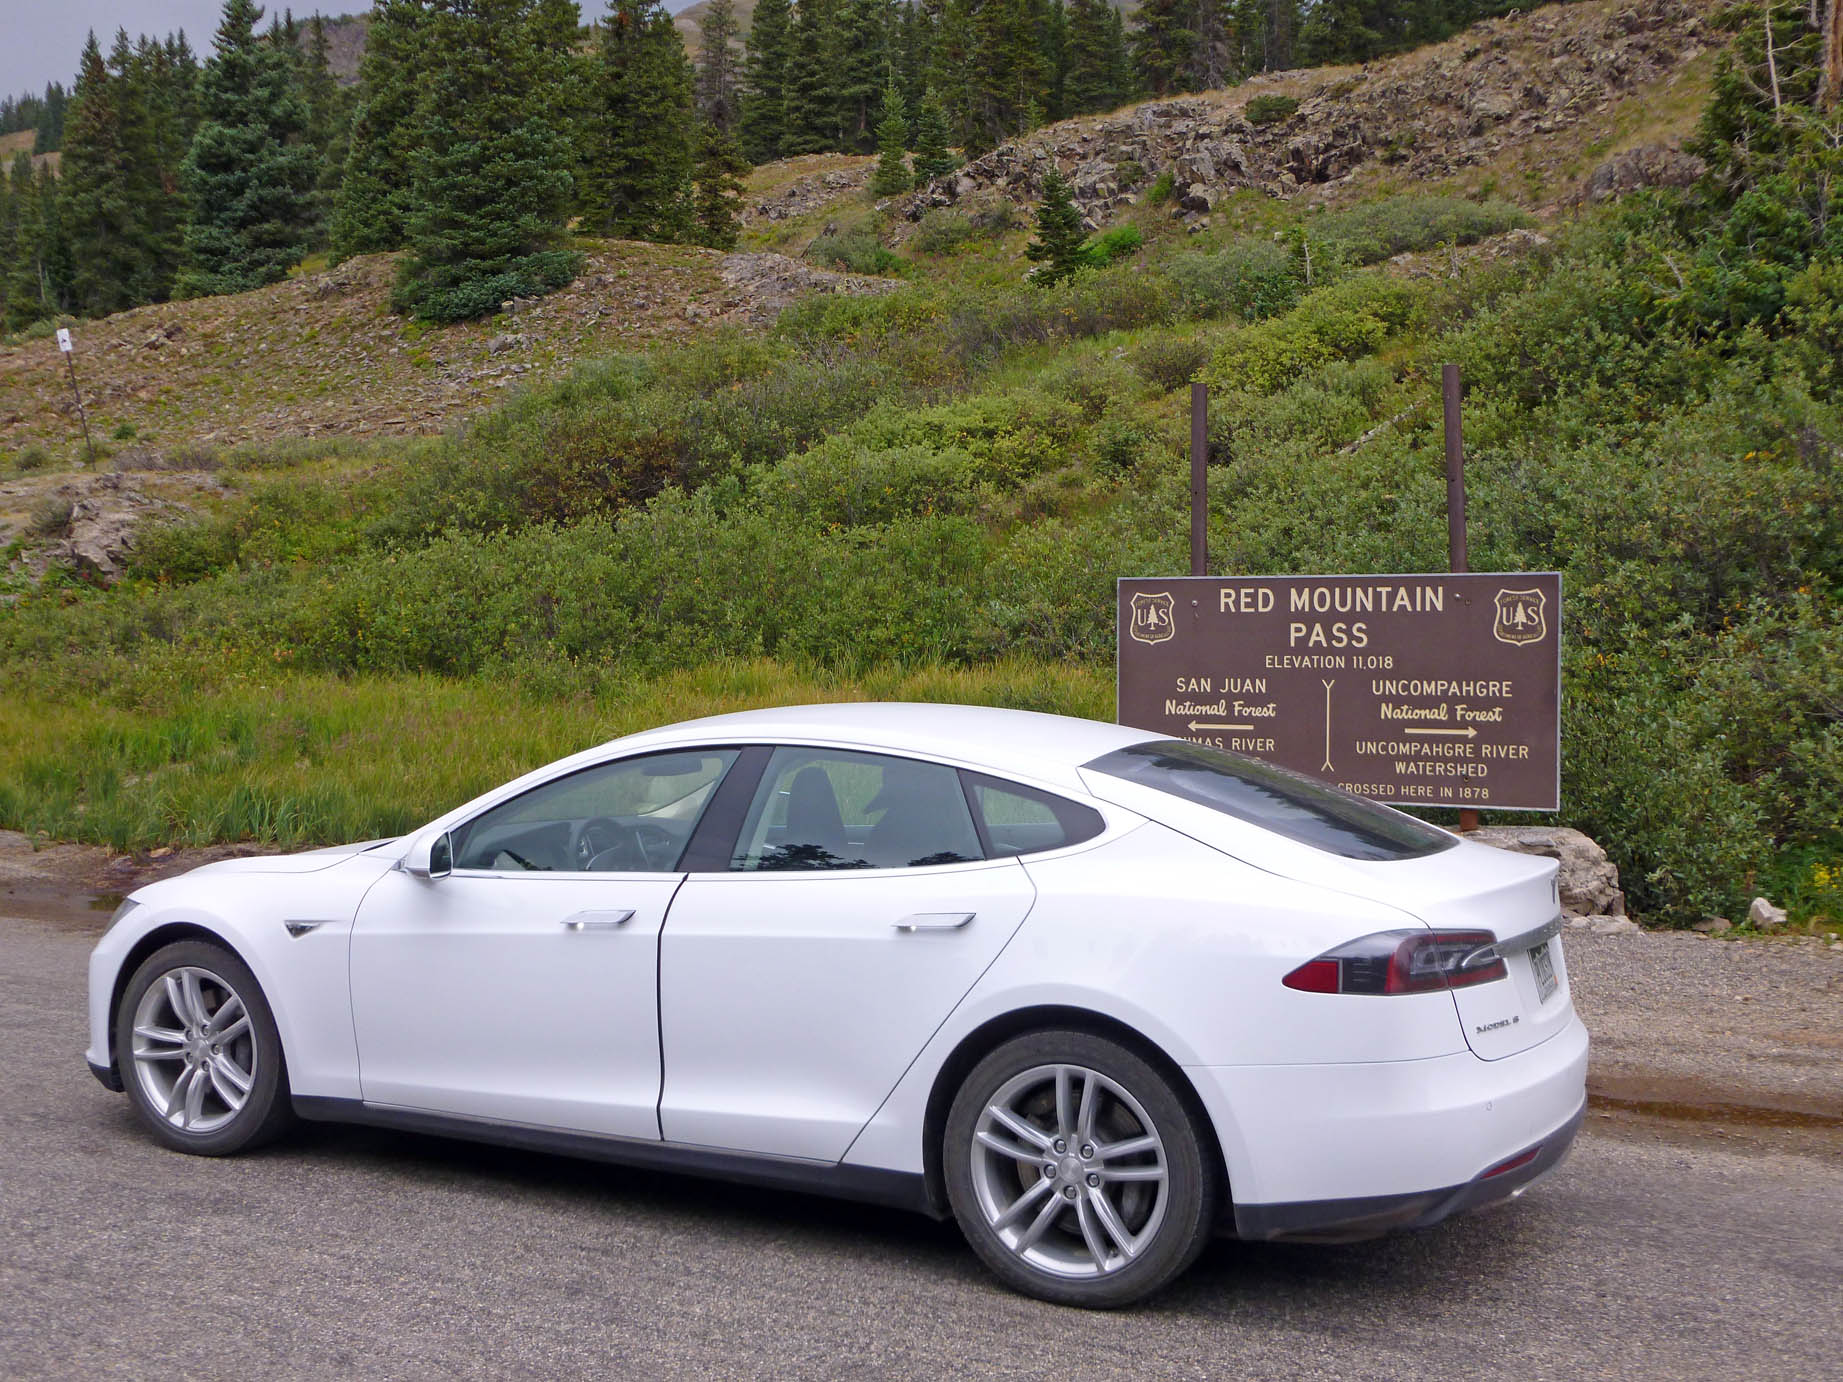 Model S at Red Mountain Pass2369sf 8-26-20.jpg